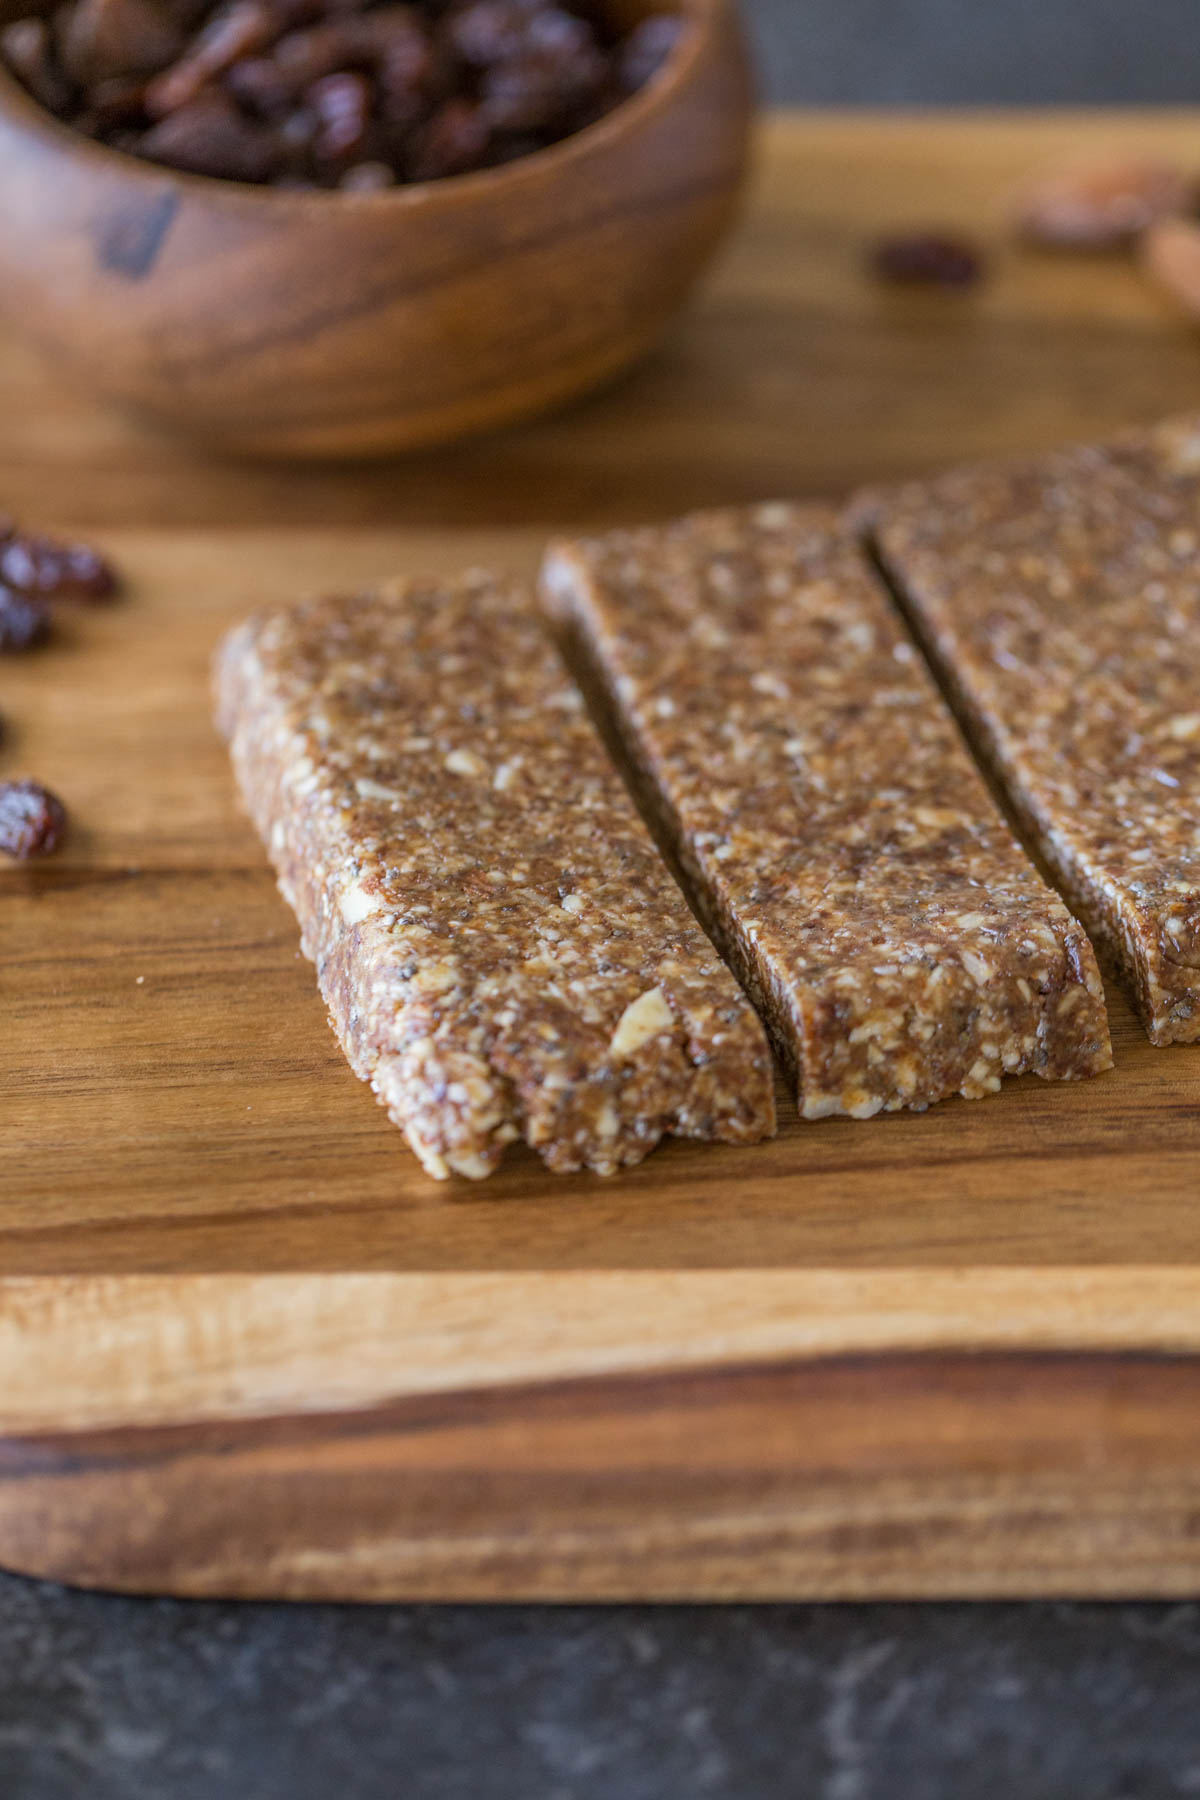 Five Ingredient No Bake Energy Bars on a cutting board, along with a small wood bowl of raisins. 